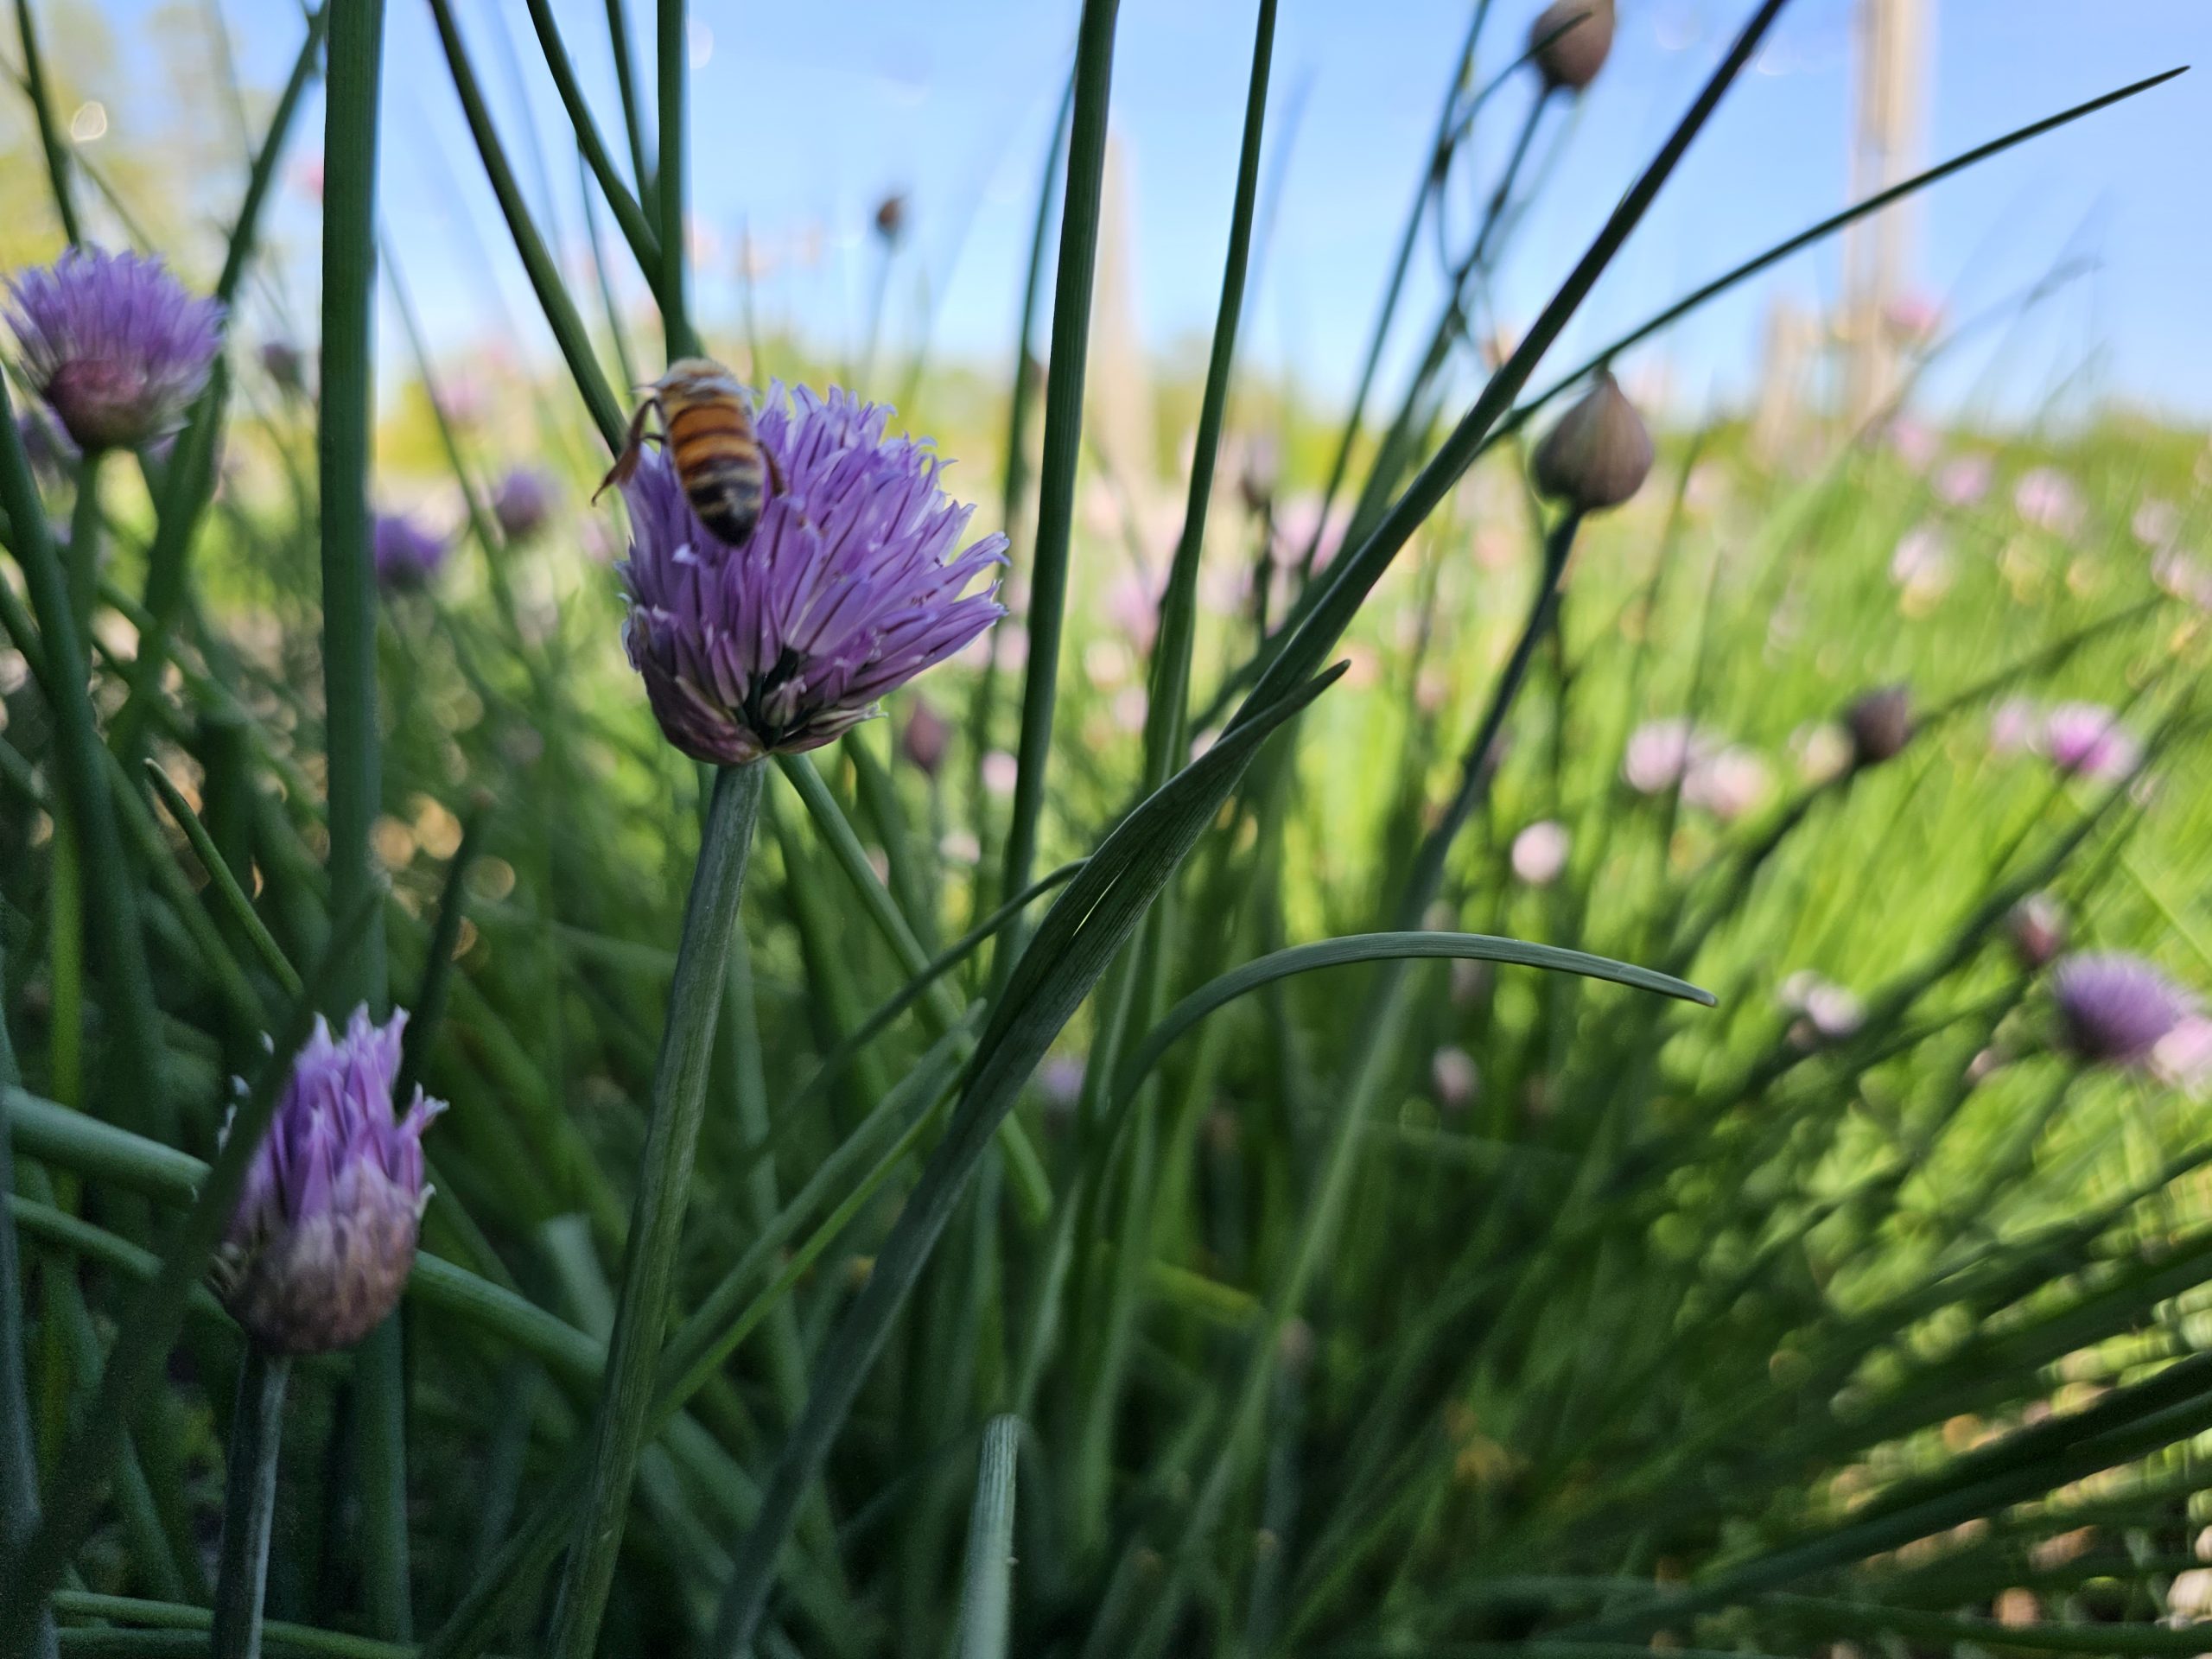 A honey bee lands on a lavender-colored flower in a field full of long green grass and flowering plants.